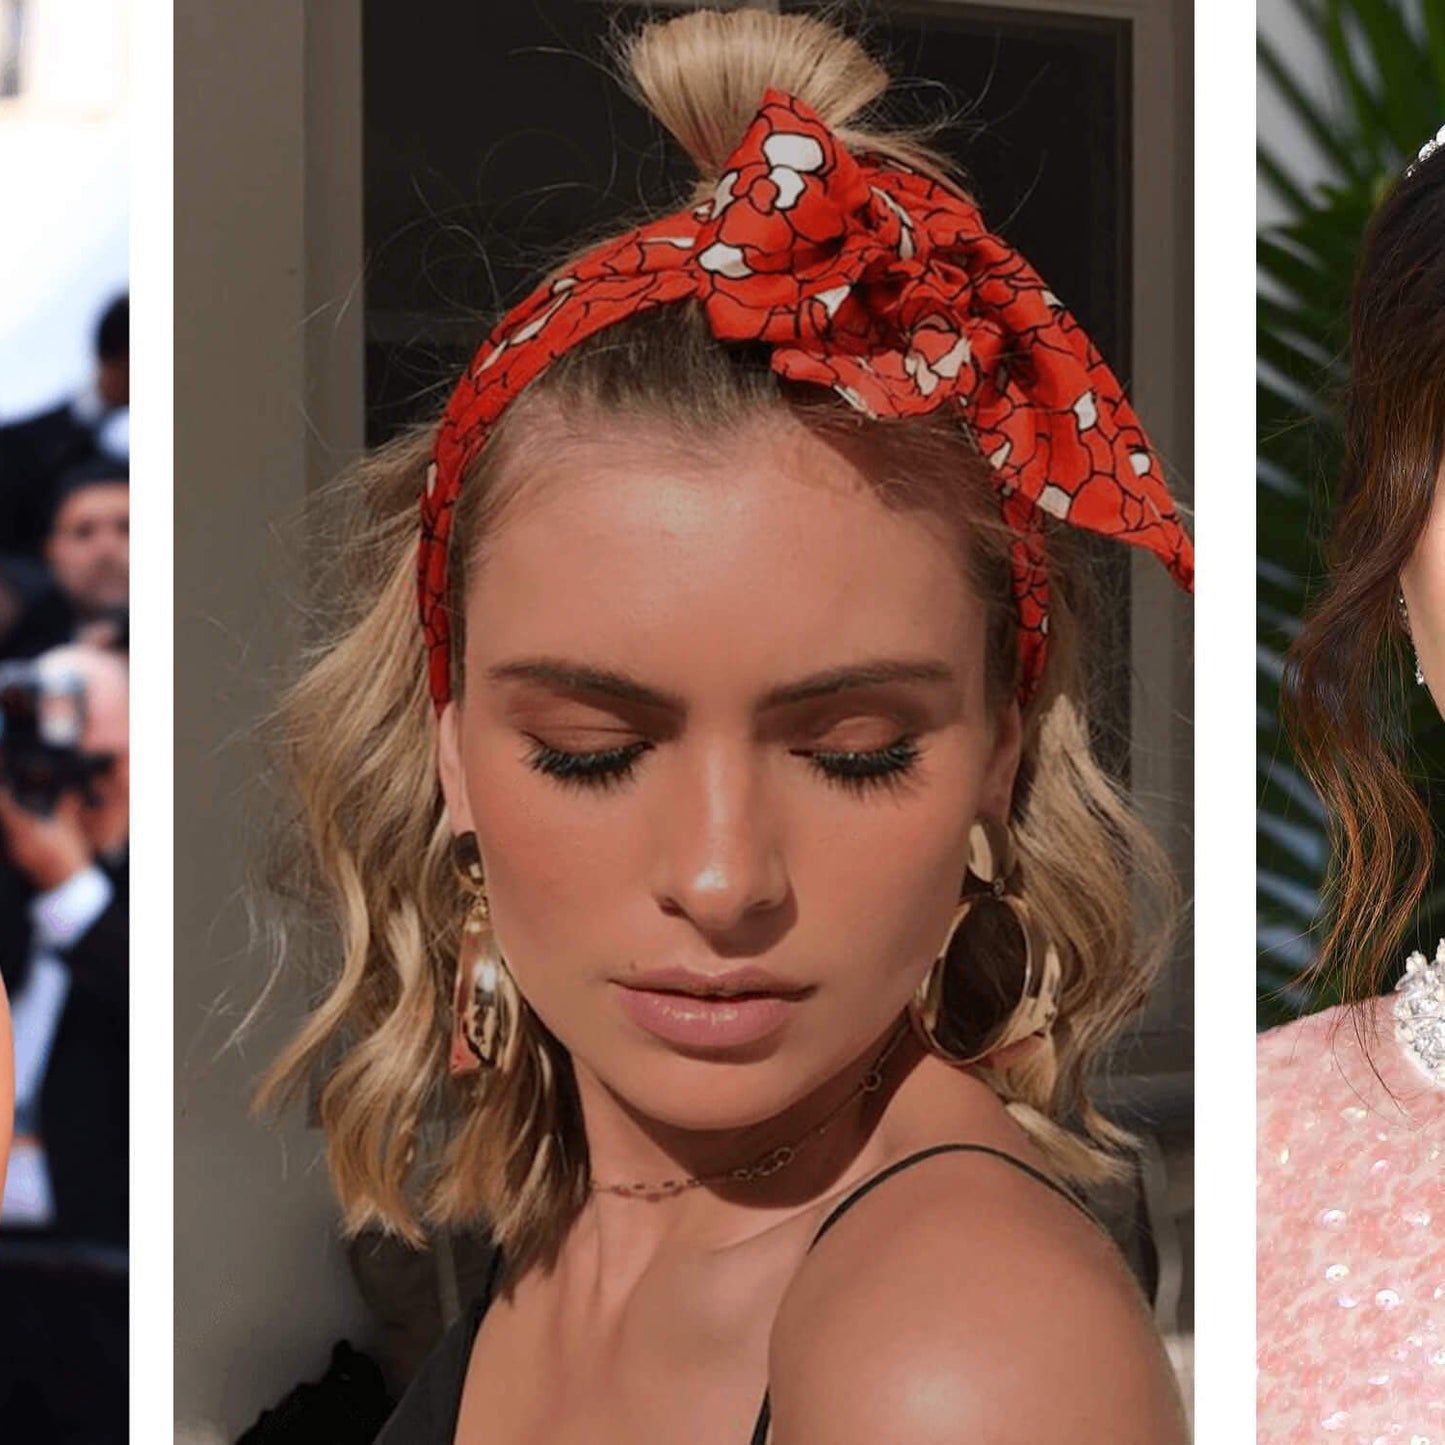 Or top 5 must try holiday hairstyles.